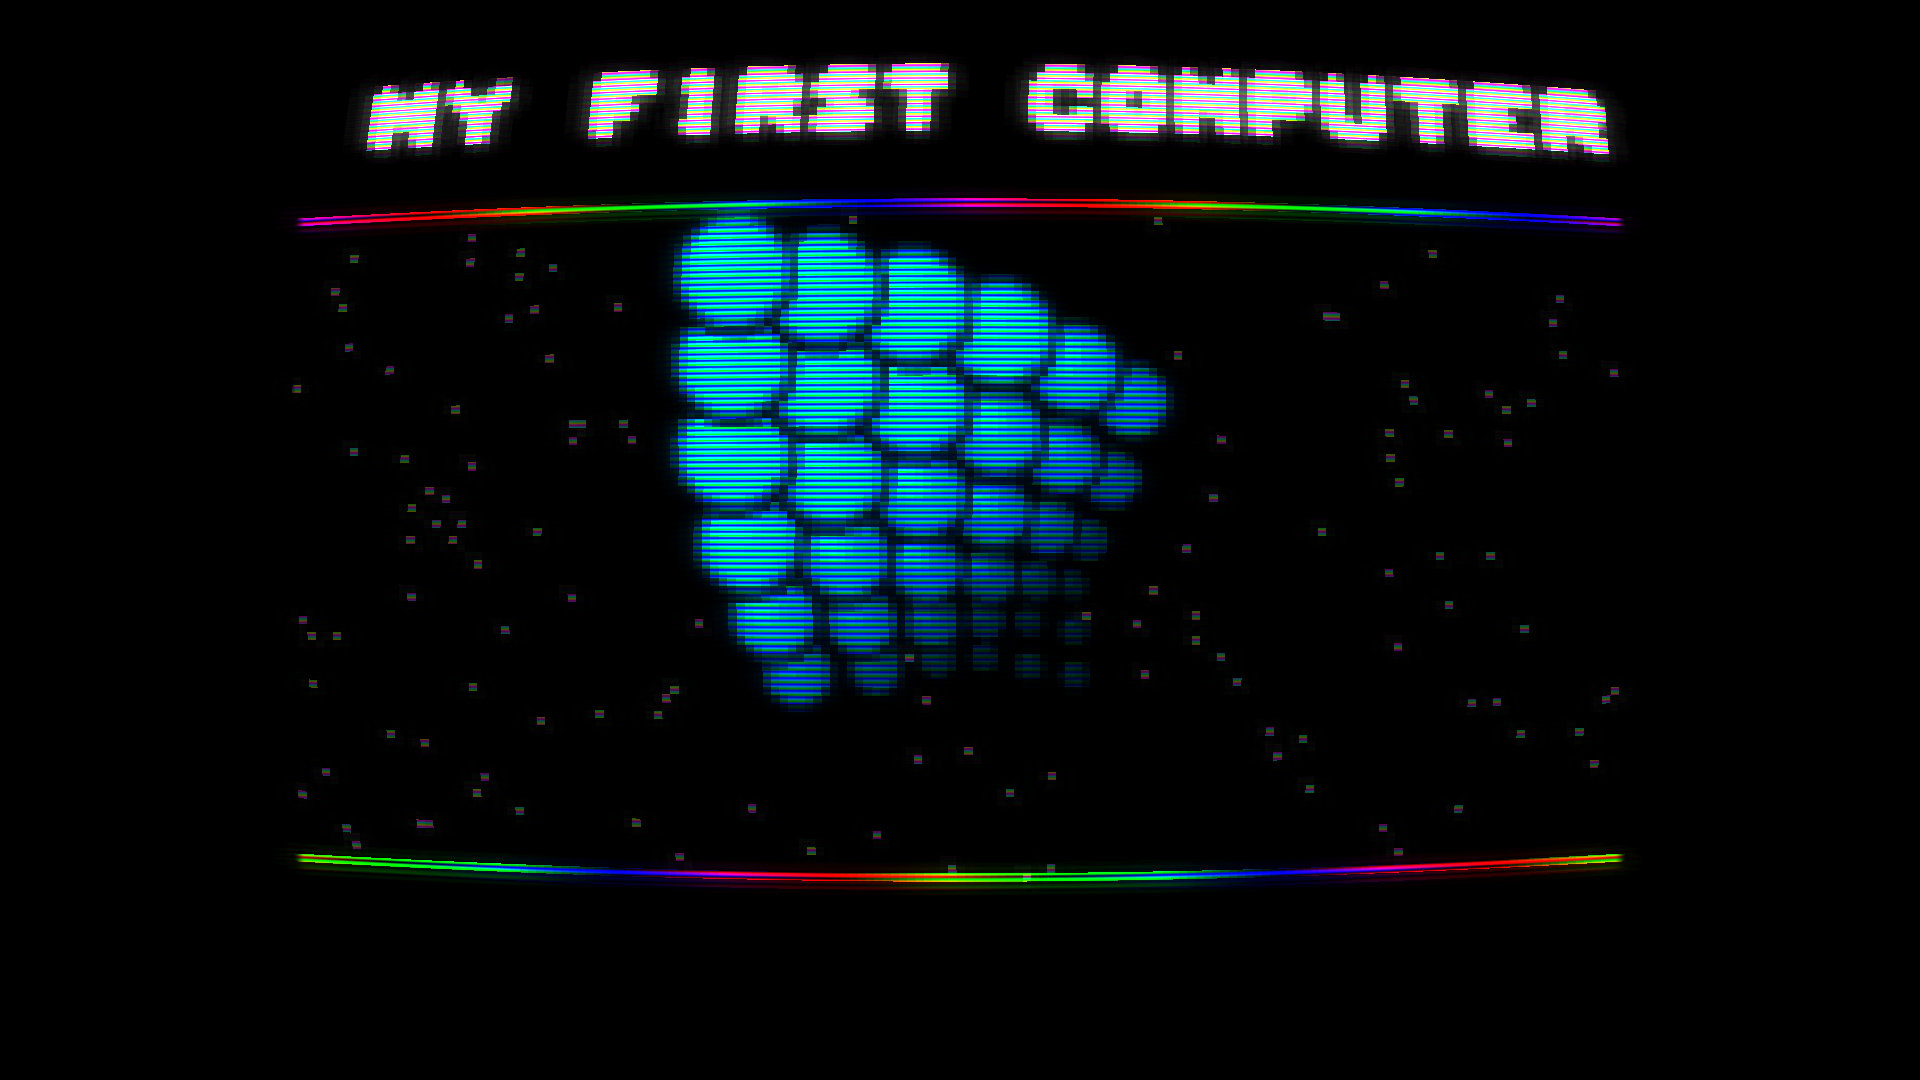 Screenshot of the work. A grid of pale blue balls in 3D perspective against a pixellated starfield, with the words 'my first computer' at the top.